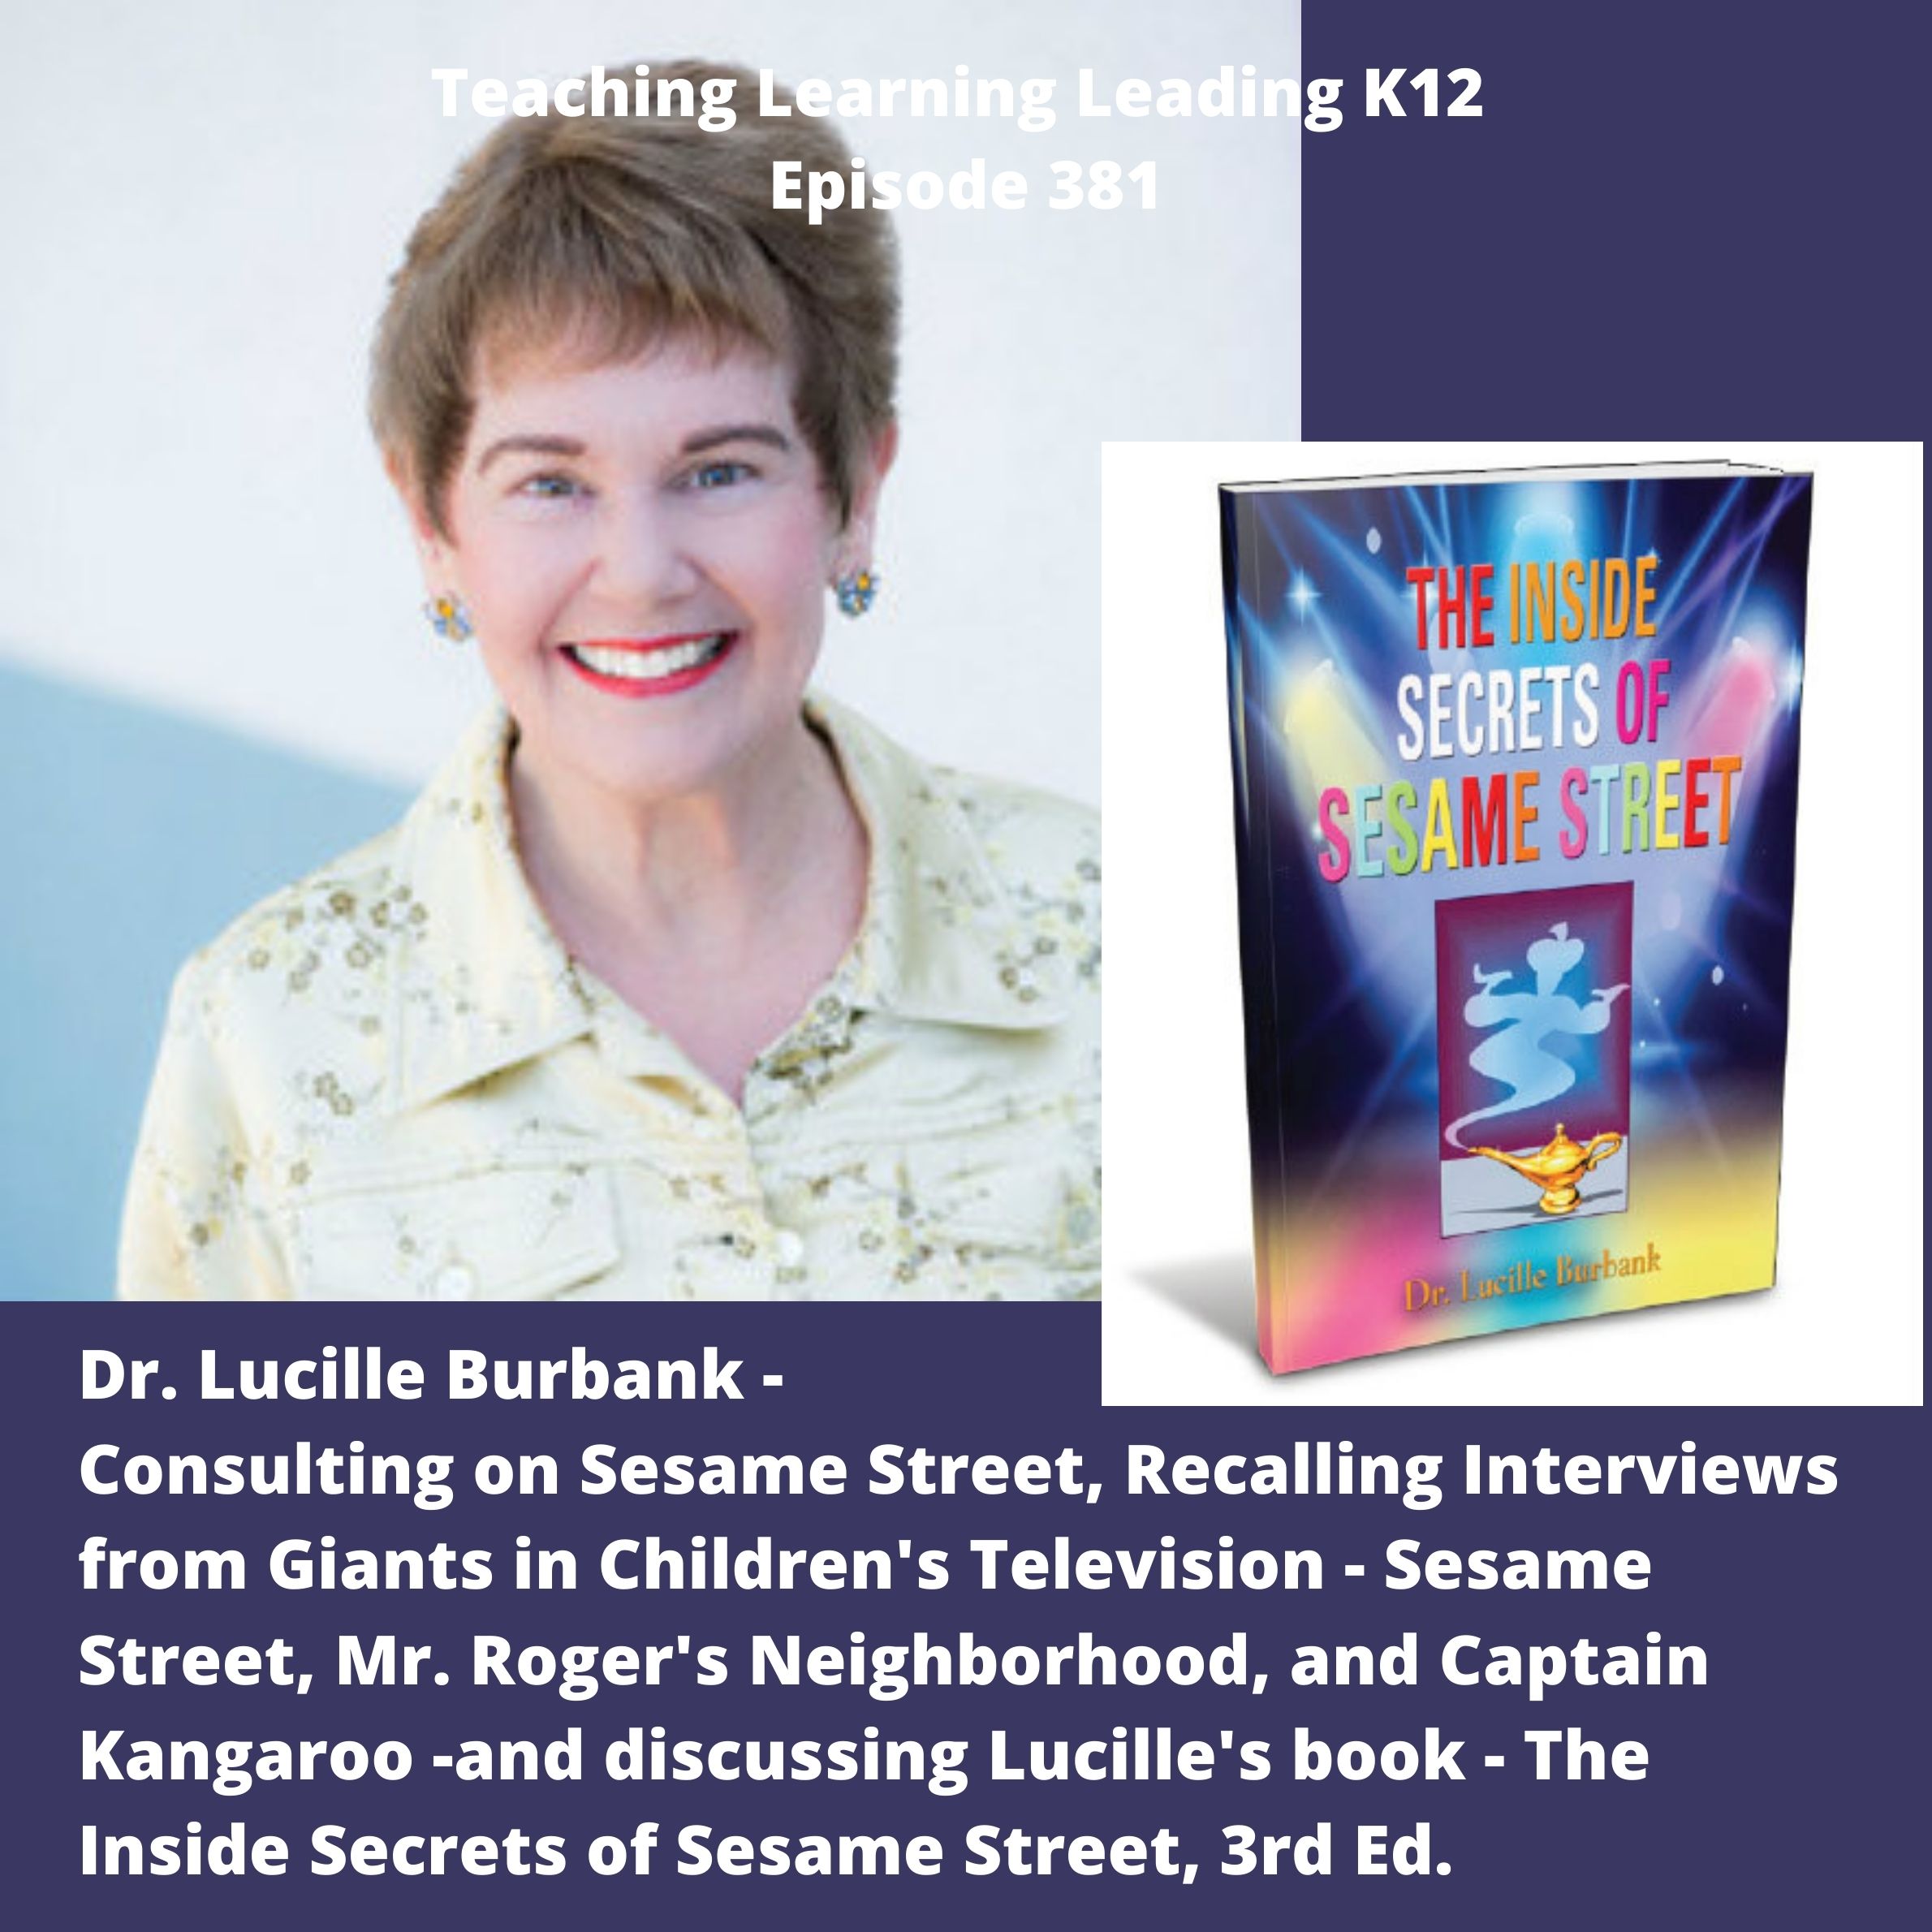 Dr. Lucille Burbank -  Being a Consultant on Sesame Street, Recalling Some Awesome Interviews  from Children's Television, and her book The Inside Secrets of Sesame Street, 3rd. Ed. - 381 Image